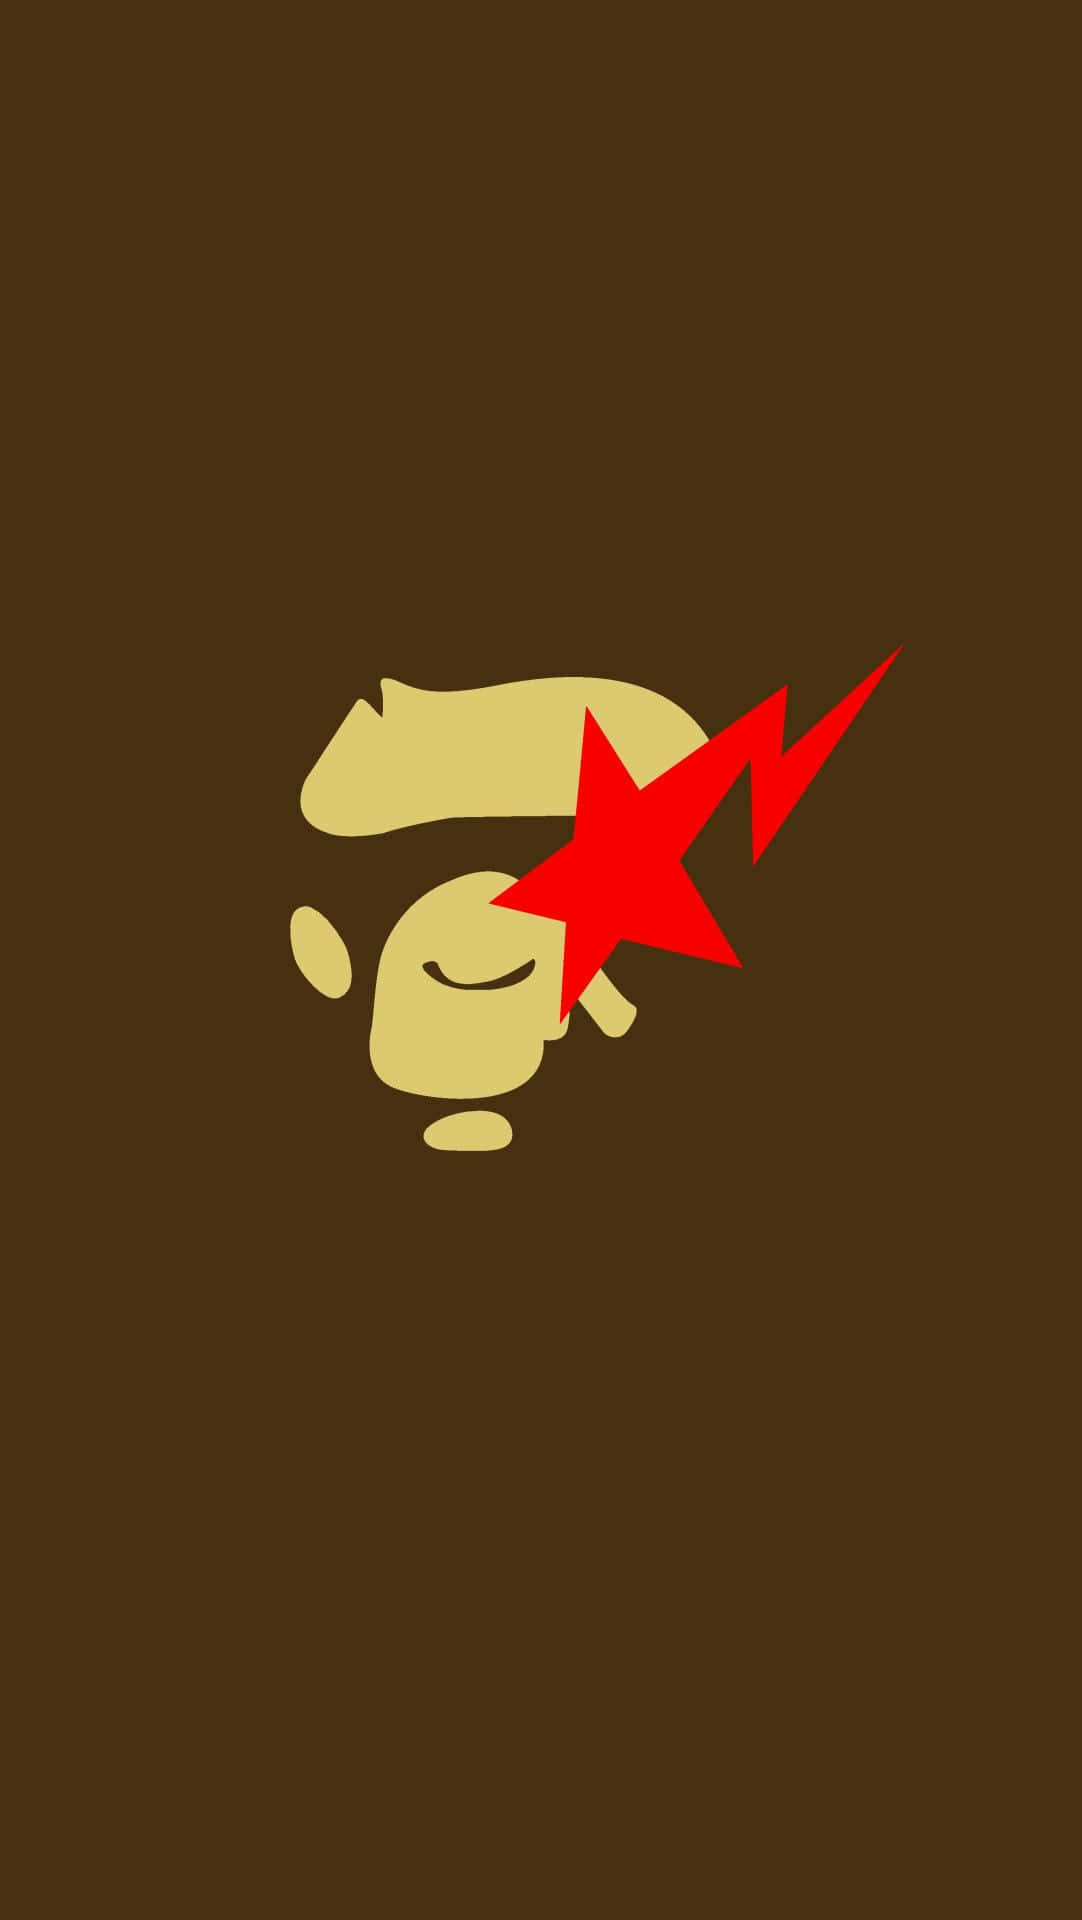 A Monkey With A Red Star On His Head Wallpaper